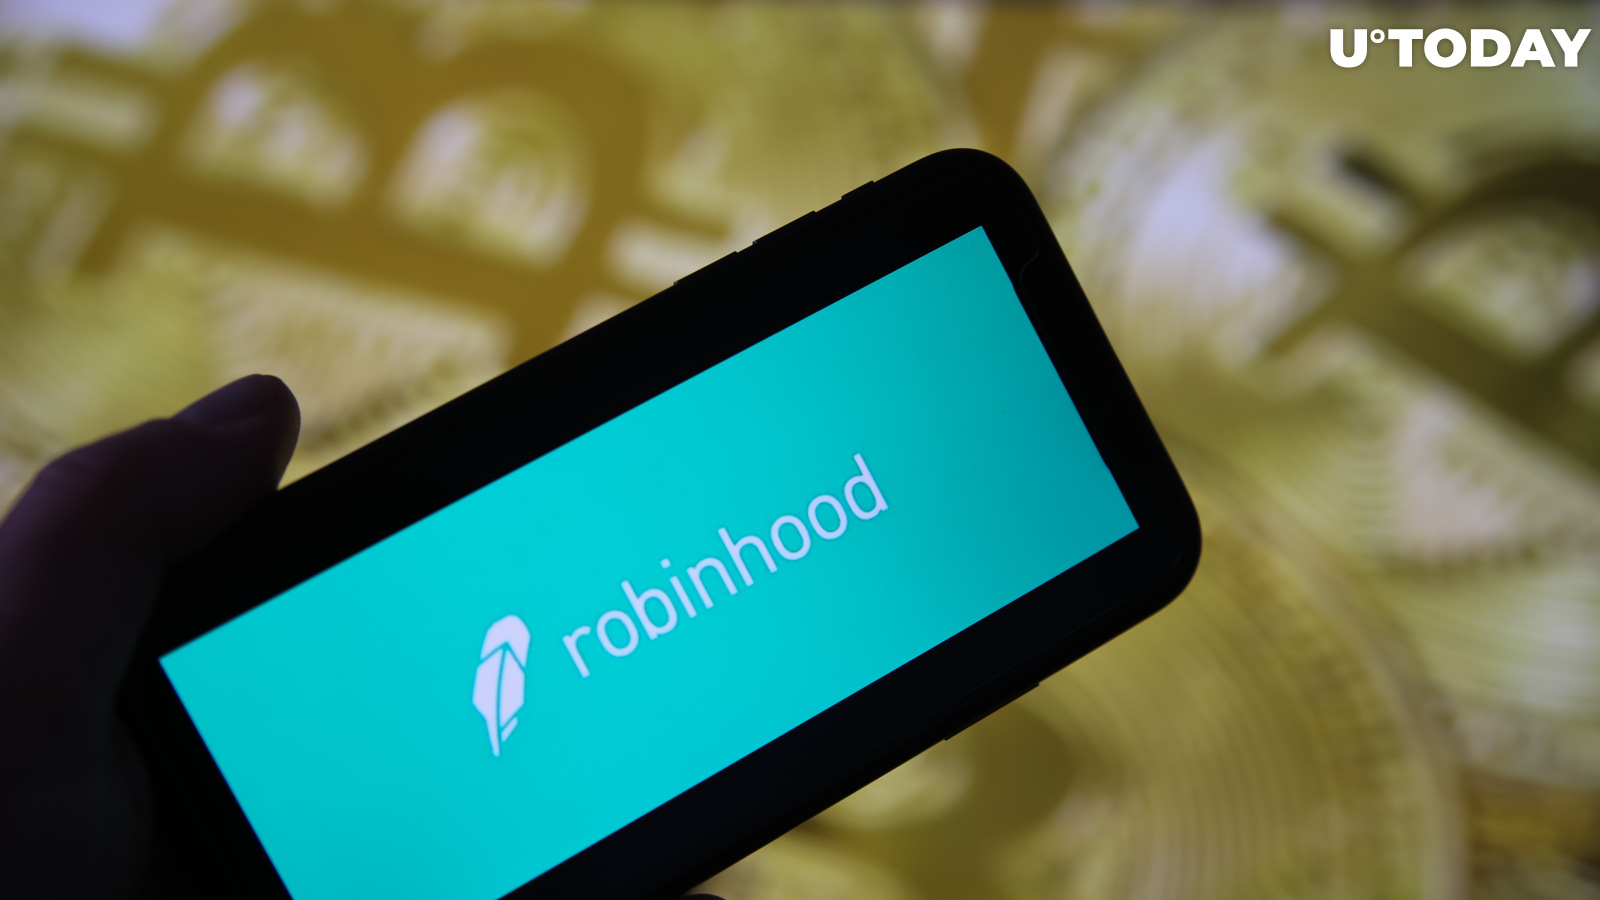 5 Million Client Email Addresses, 2 Million Client Names Compromised in Recent Robinhood Security Breach